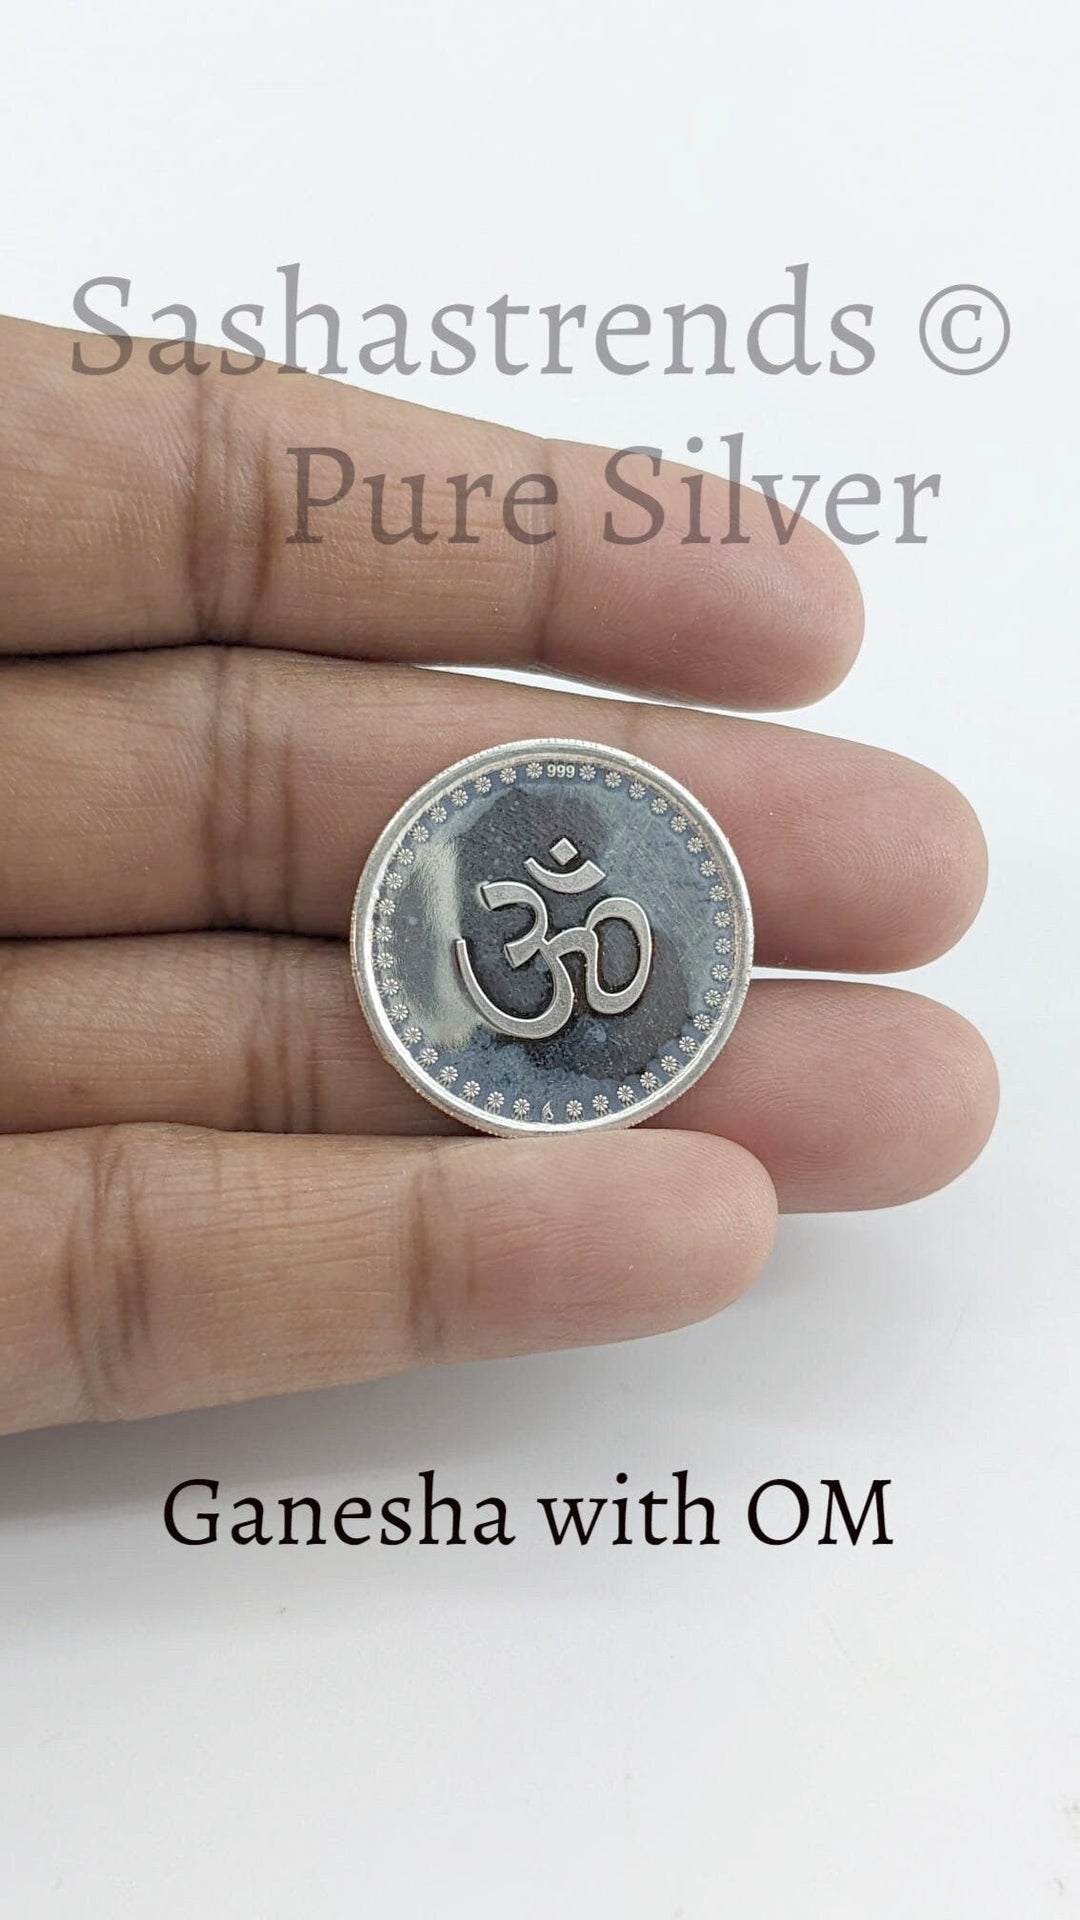 999 pure silver 5-gram coin - pure silver gift items- pure silver items for home, return gift for navarathri, wedding and housewarming